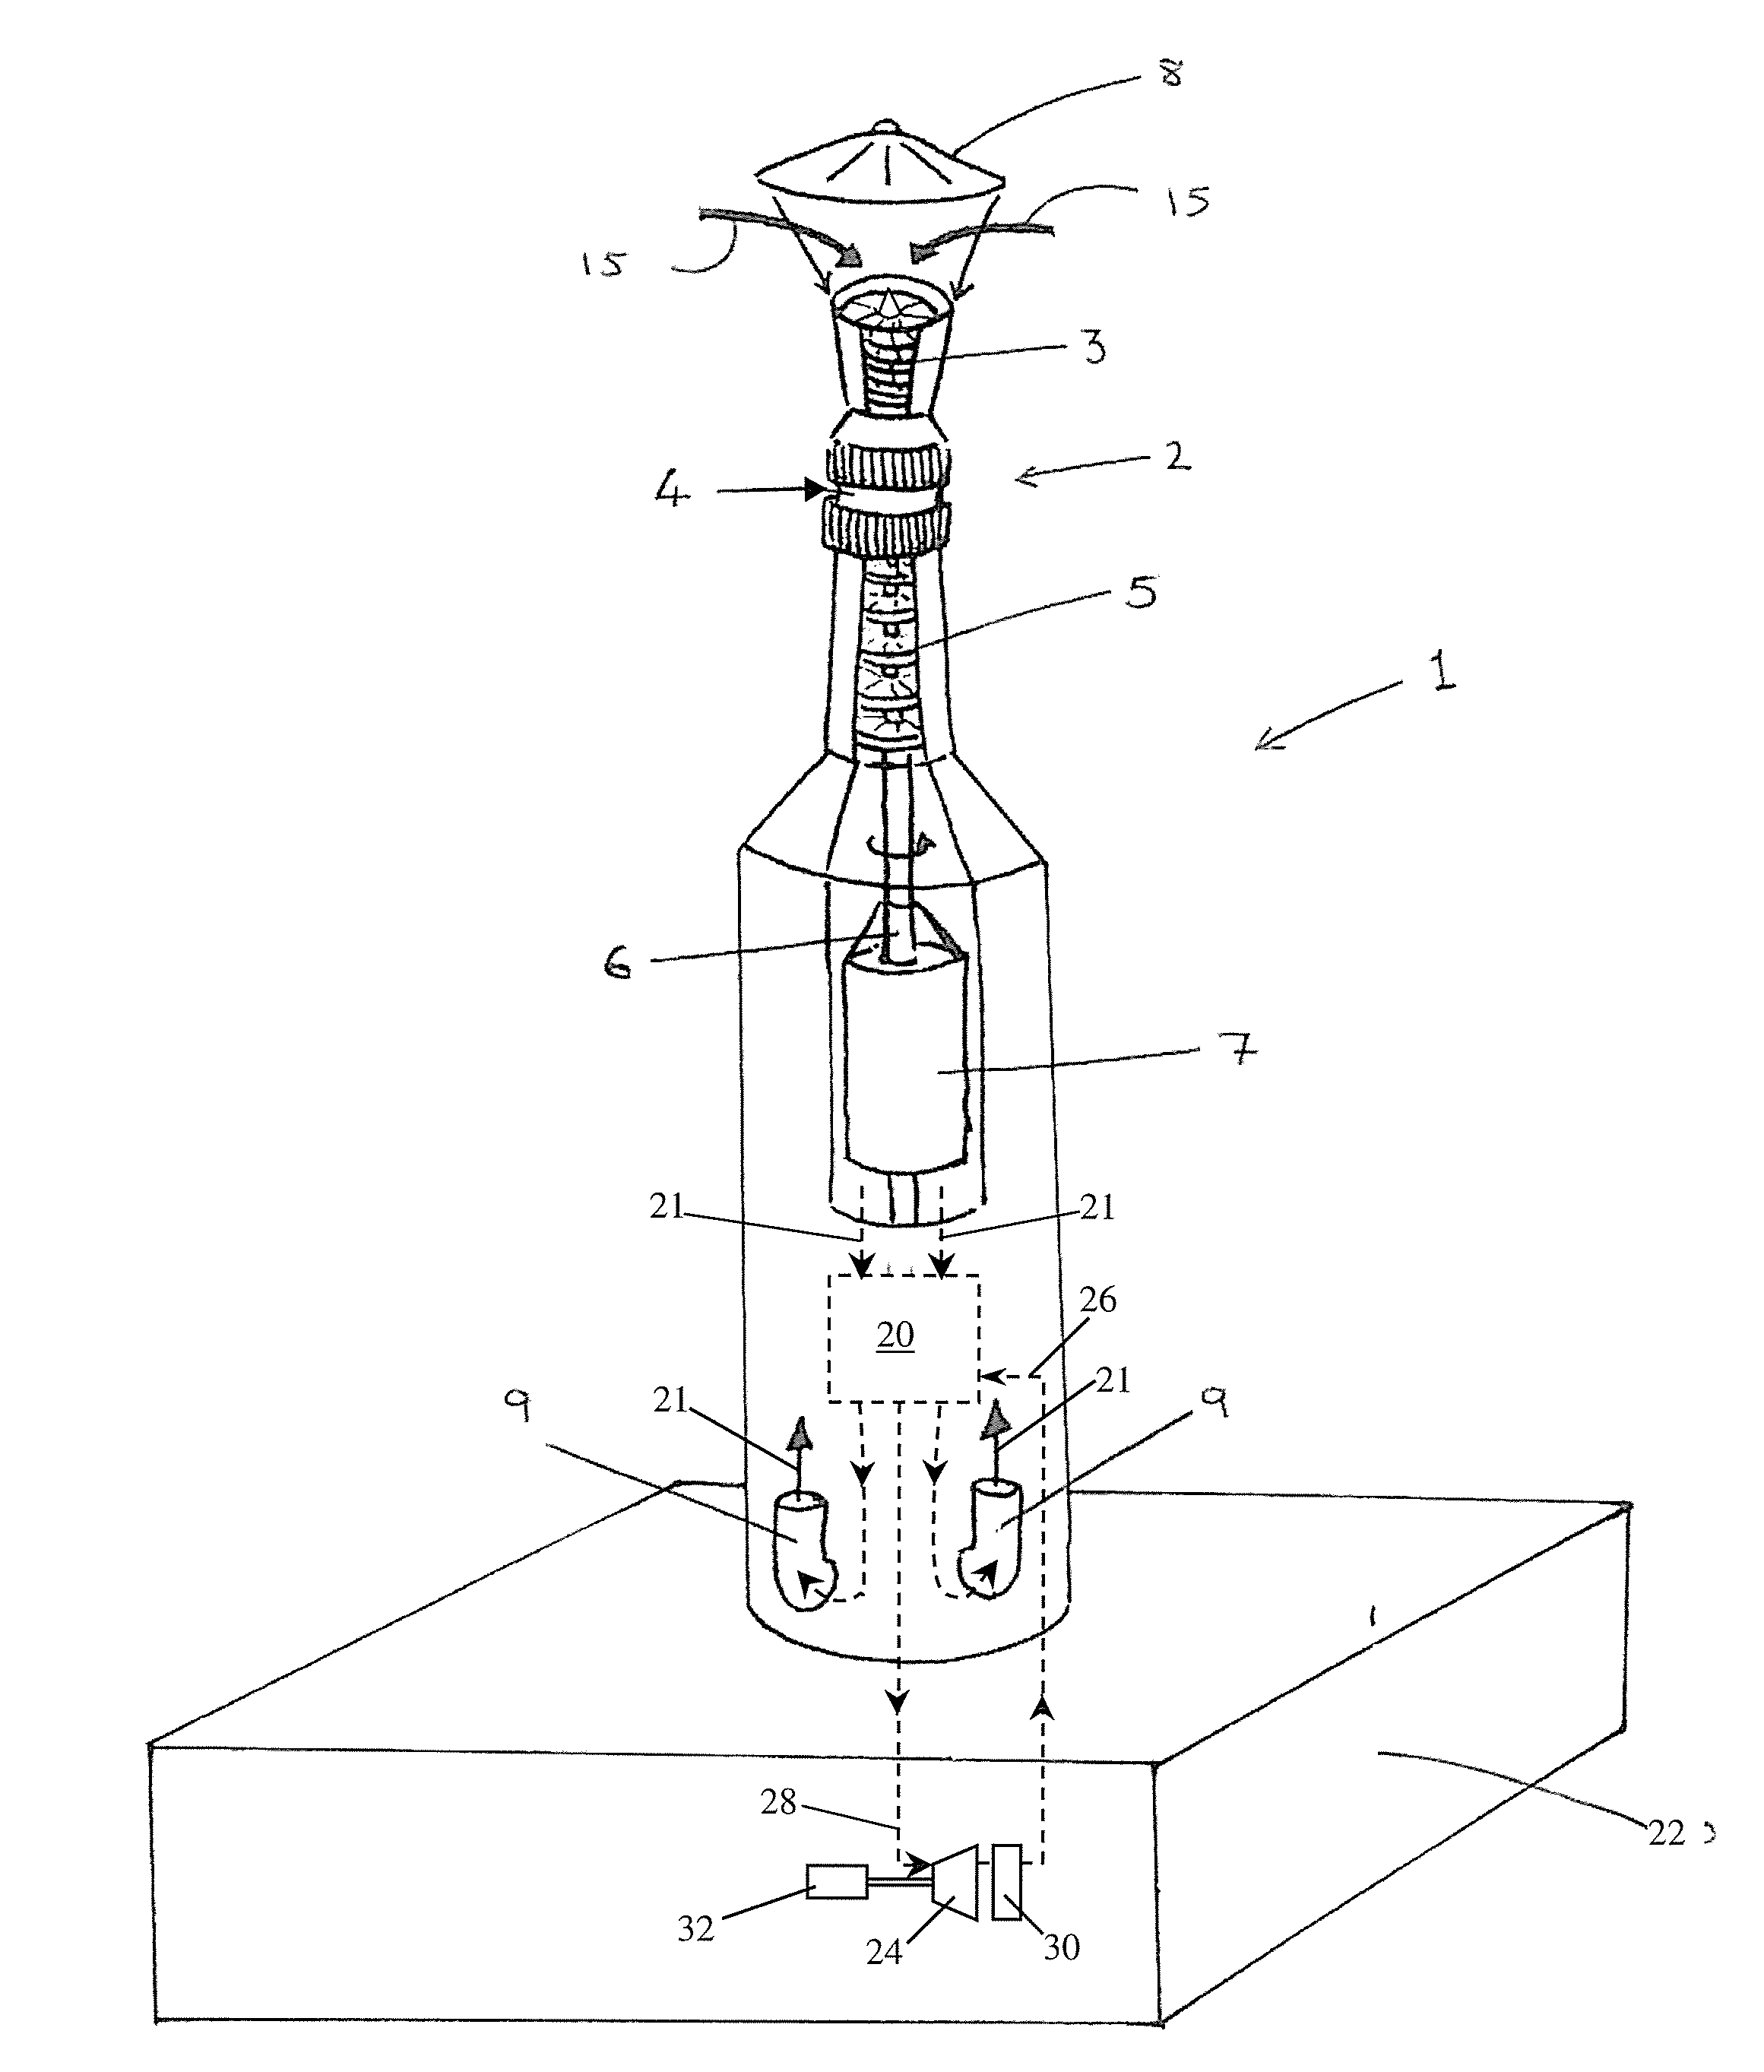 Solar Tower With Integrated Gas Turbine